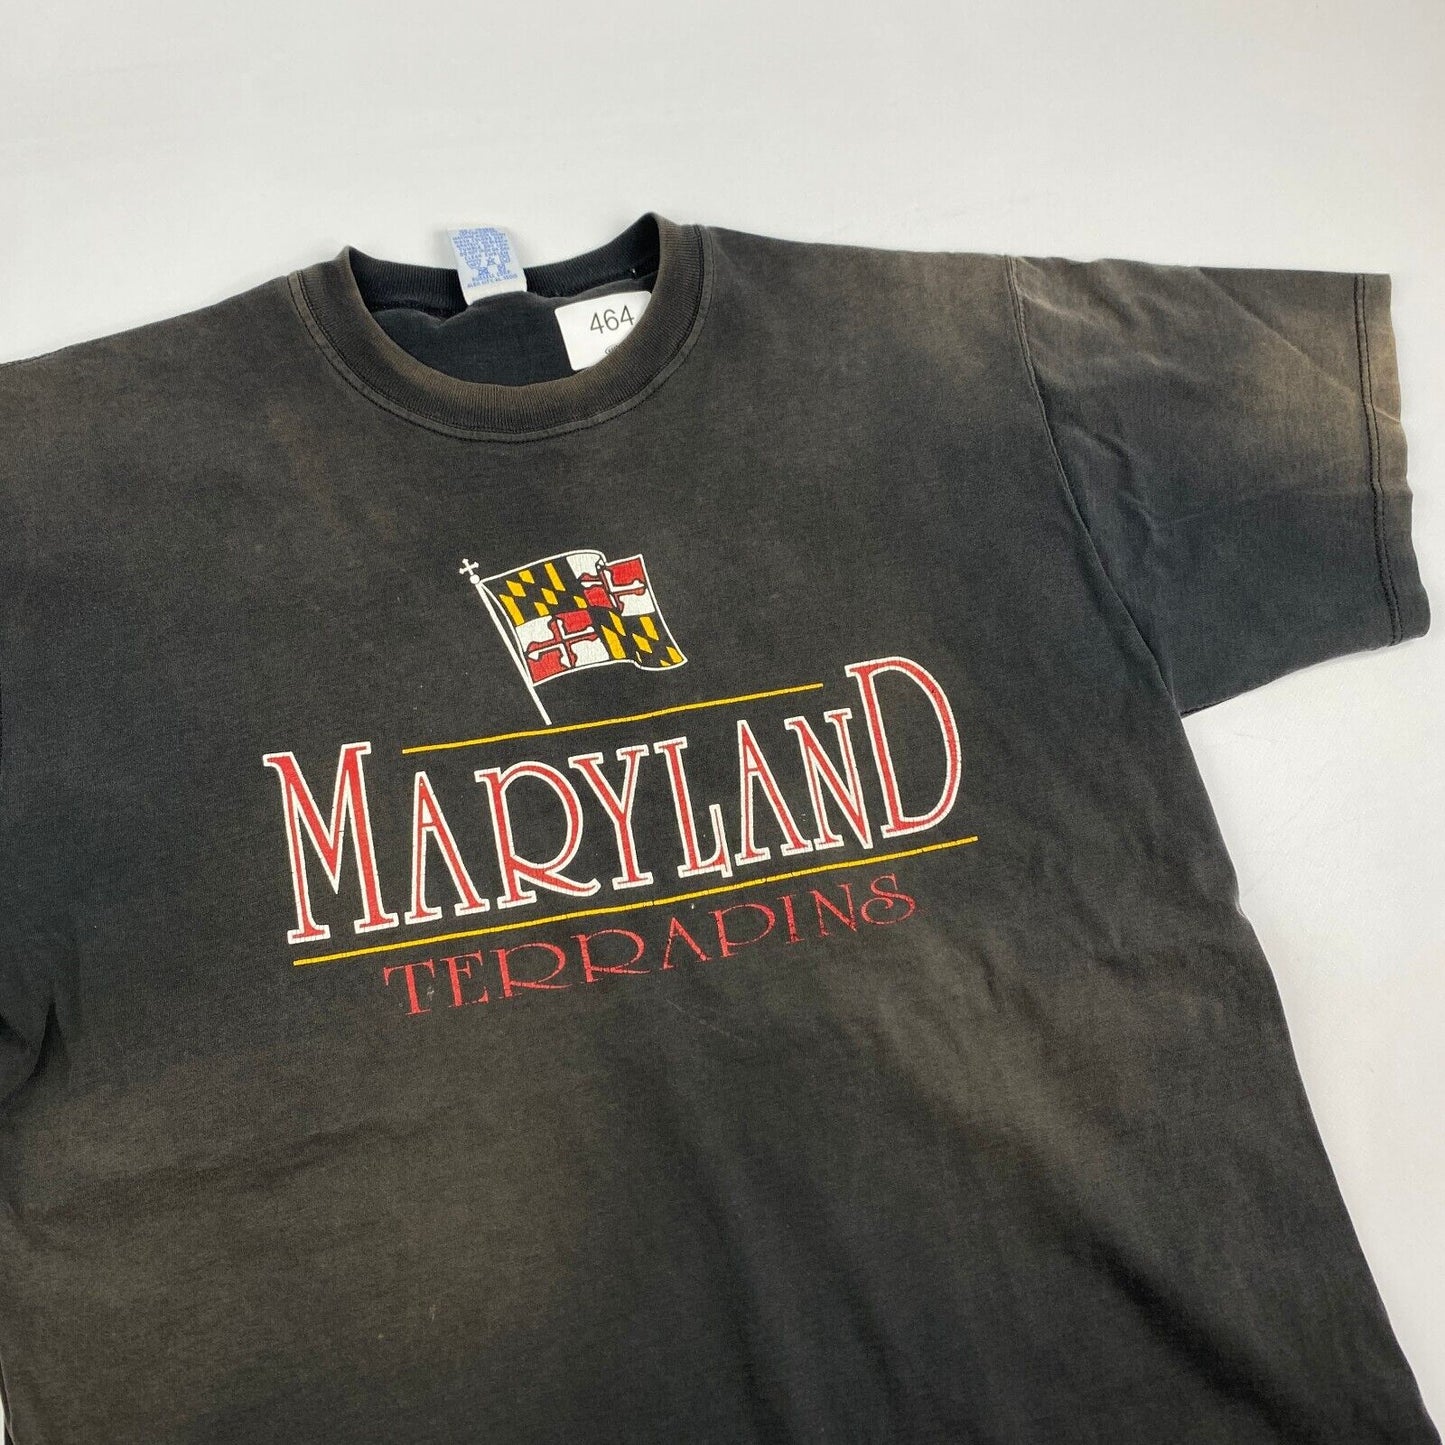 VINTAGE 90s Maryland Terrapins Sun Faded Russell Athletic T-Shirt sz XL Men